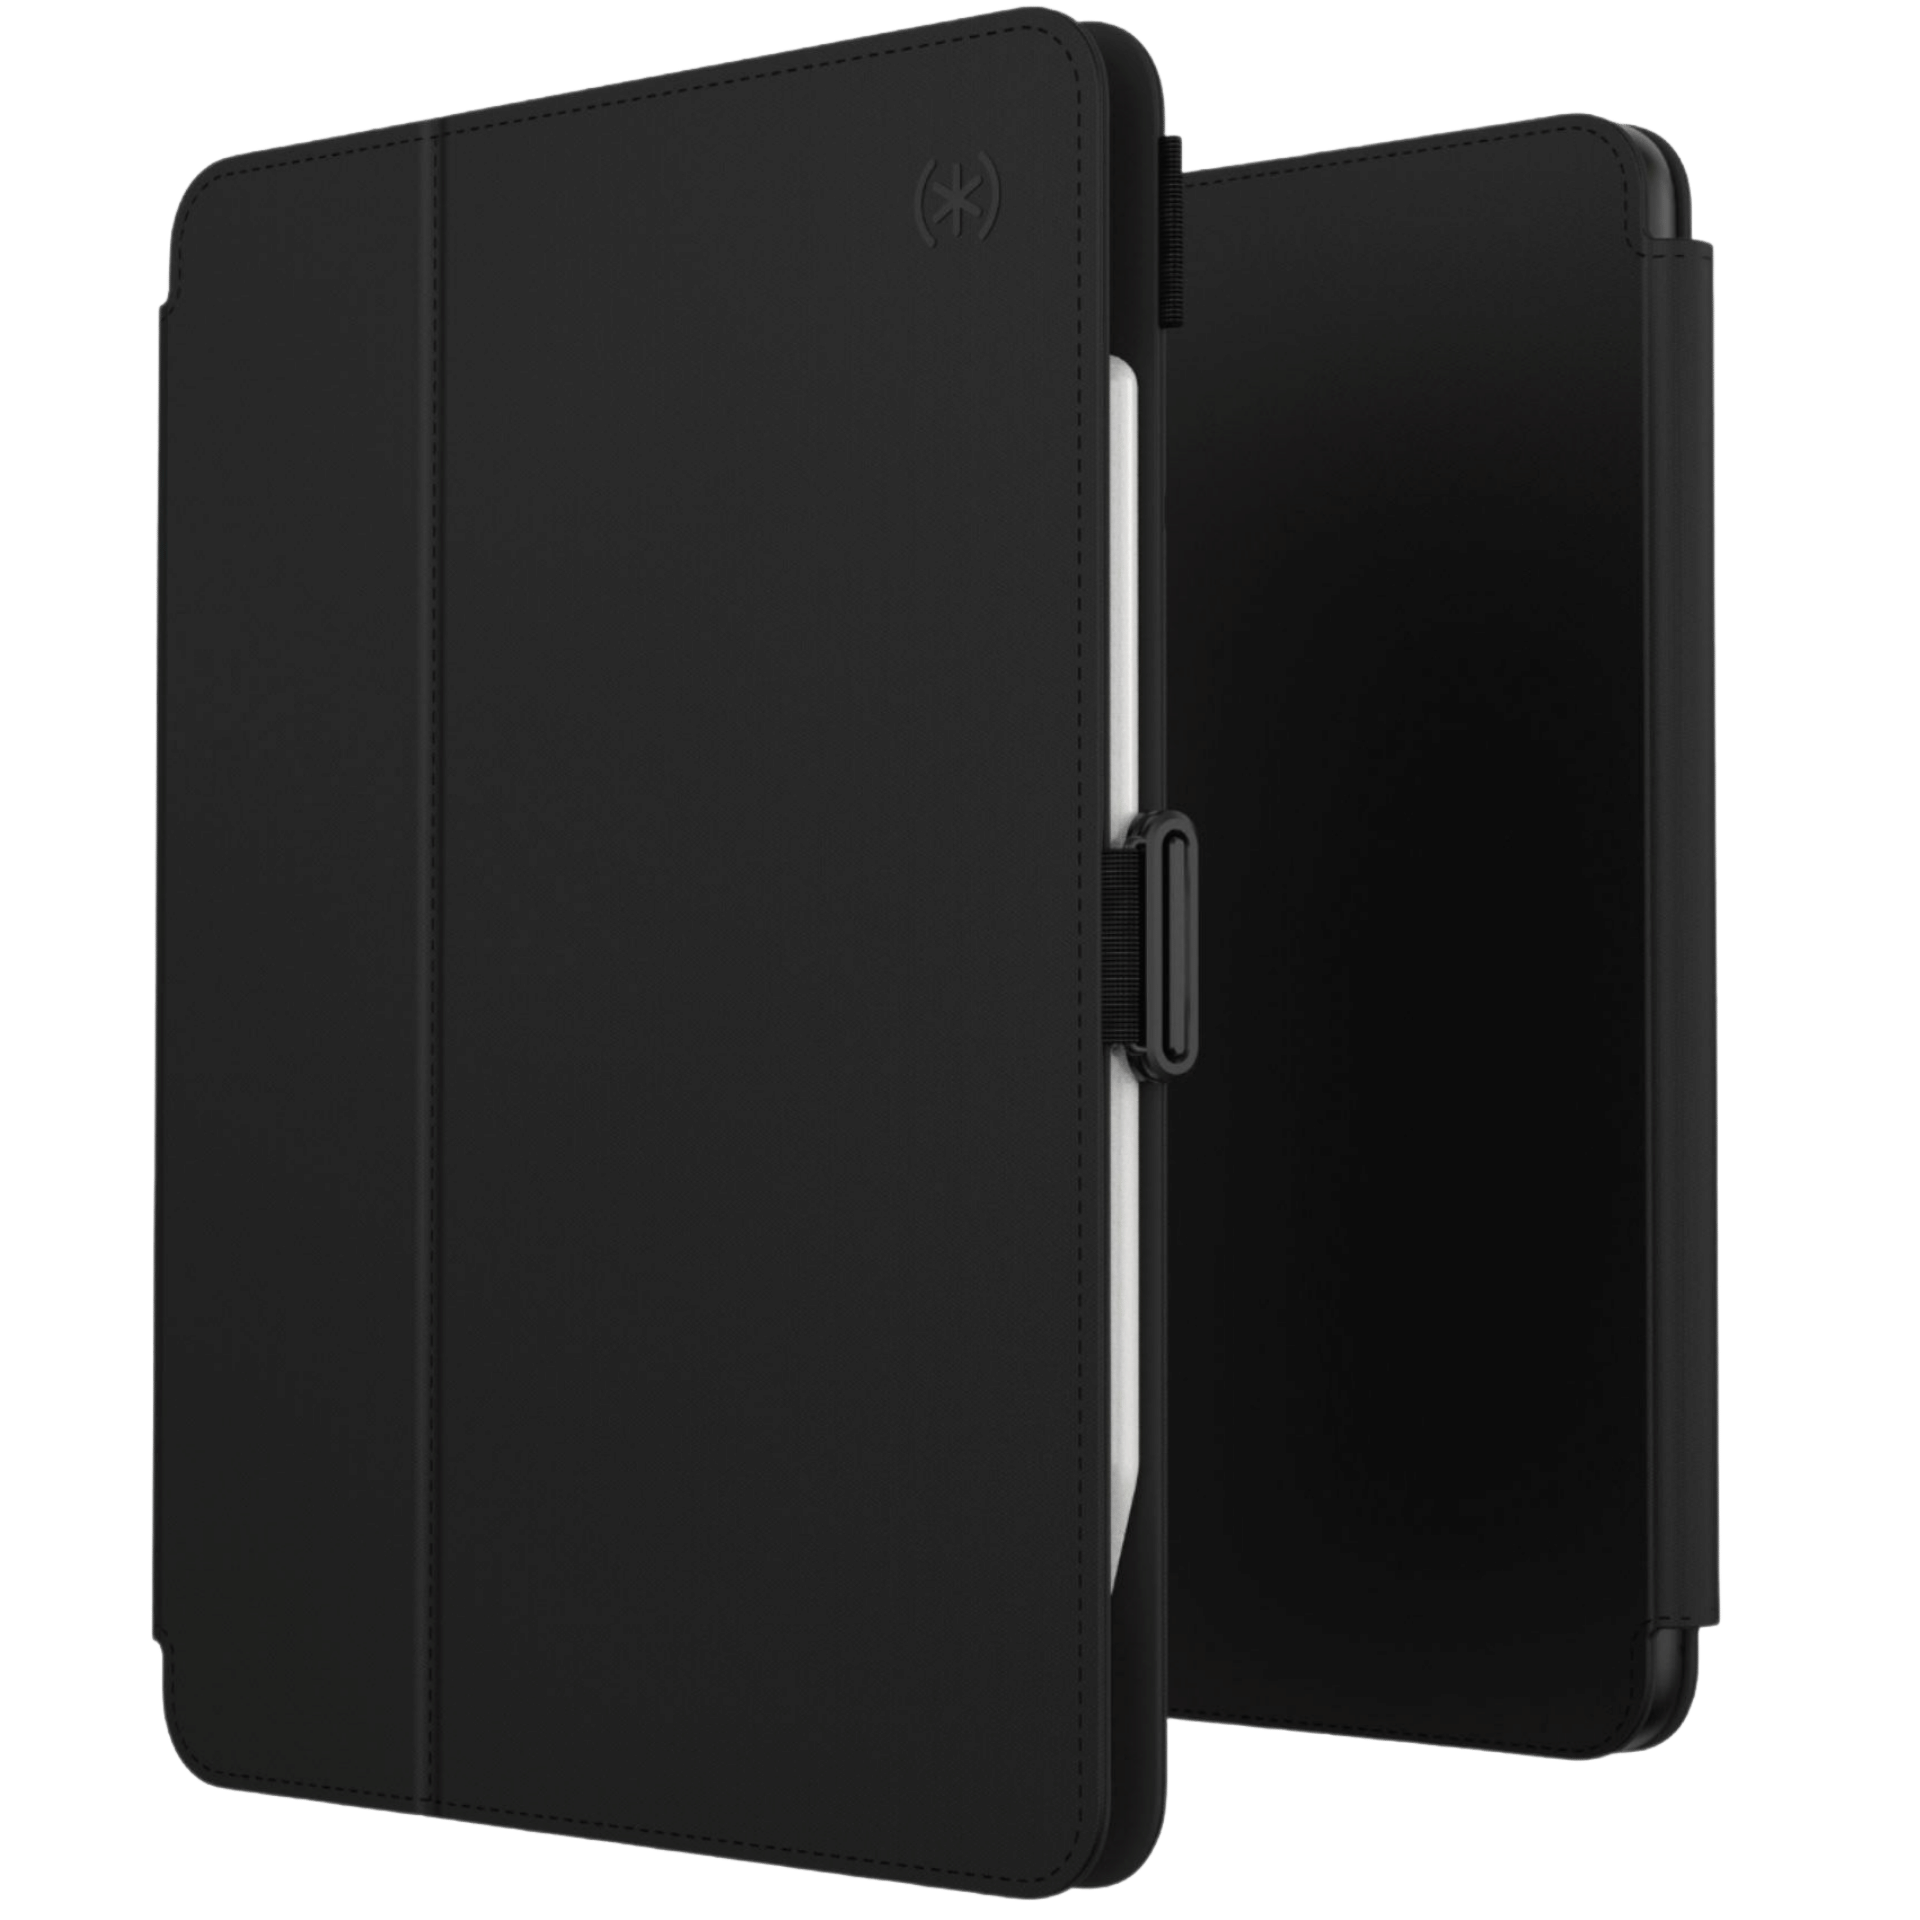 Product Image of Speck Balance Folio for iPad Air 5